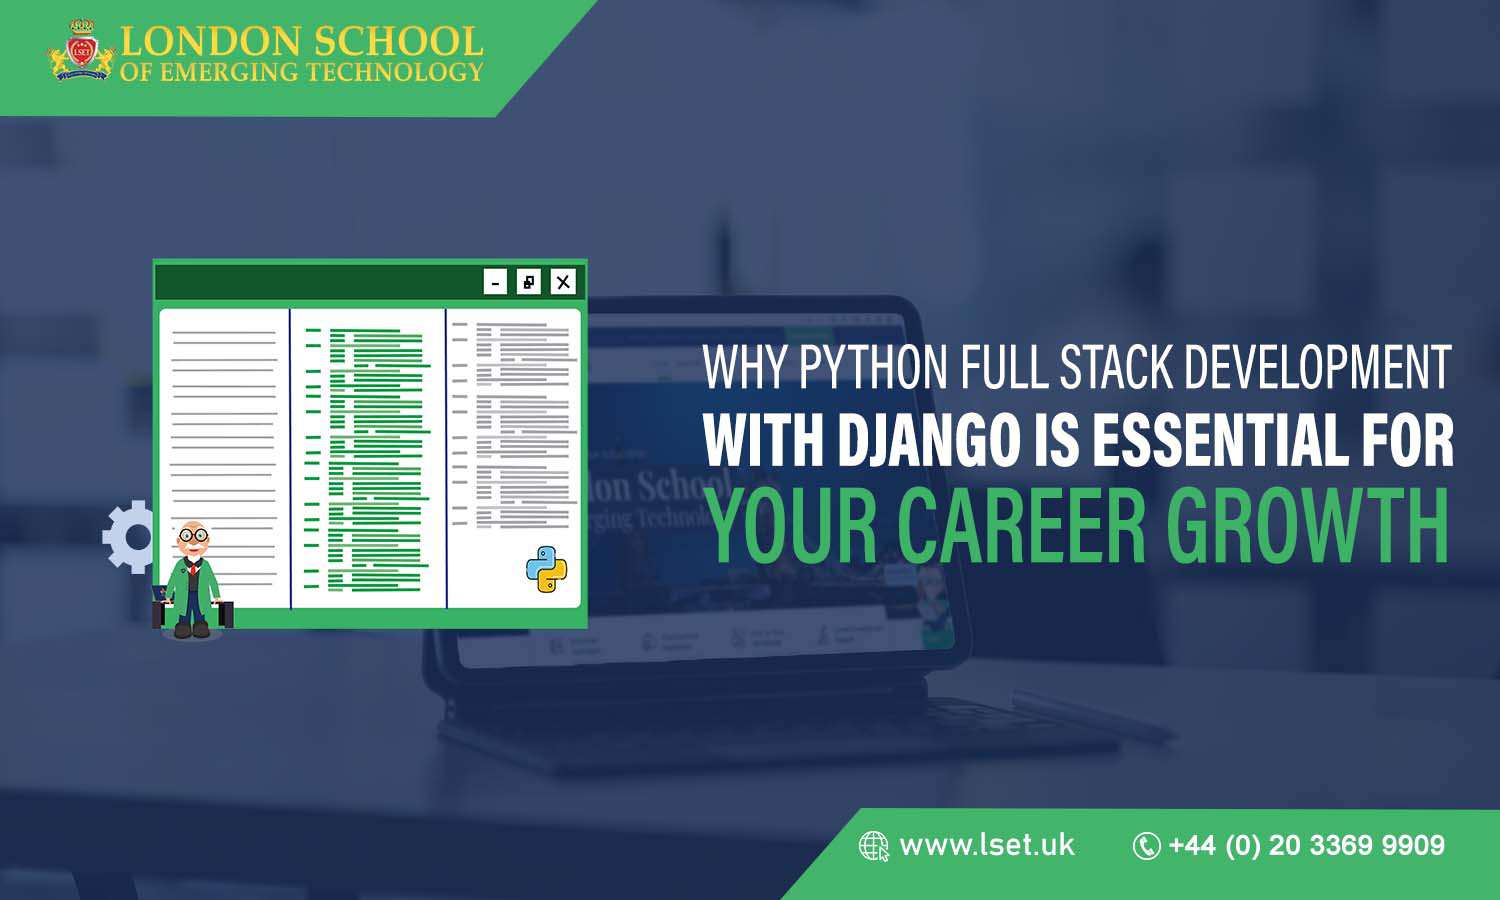 Why Python Full Stack Development with Django is Essential for Your Career Growth